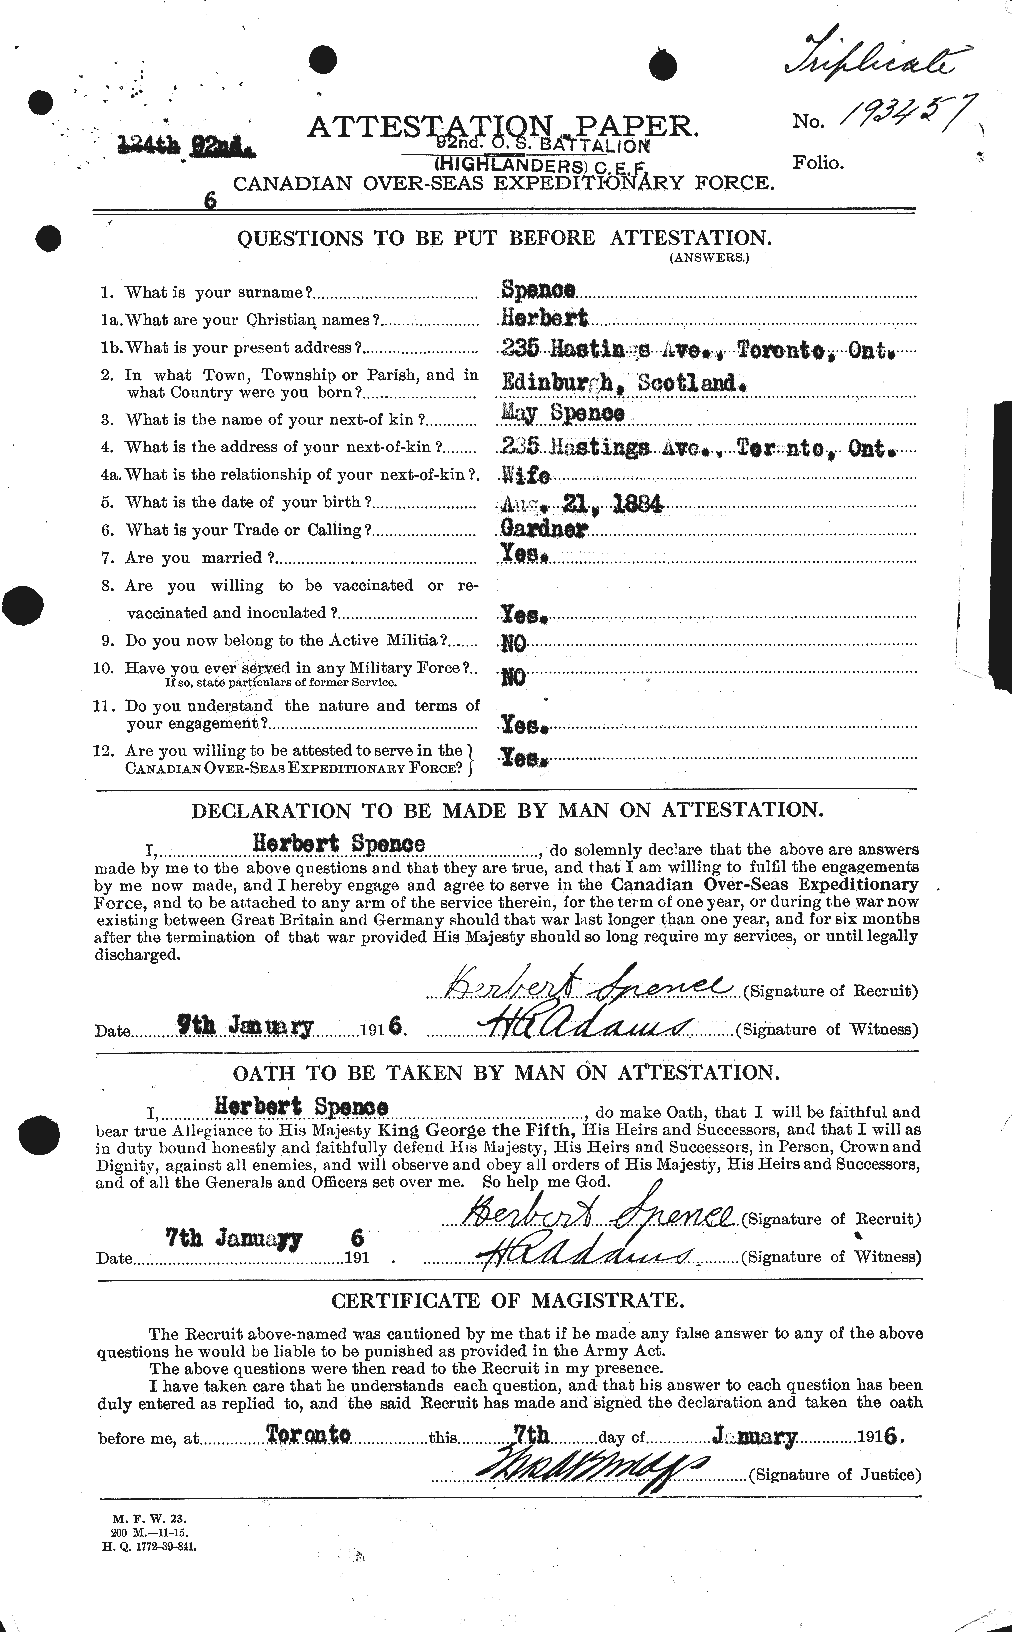 Personnel Records of the First World War - CEF 621336a